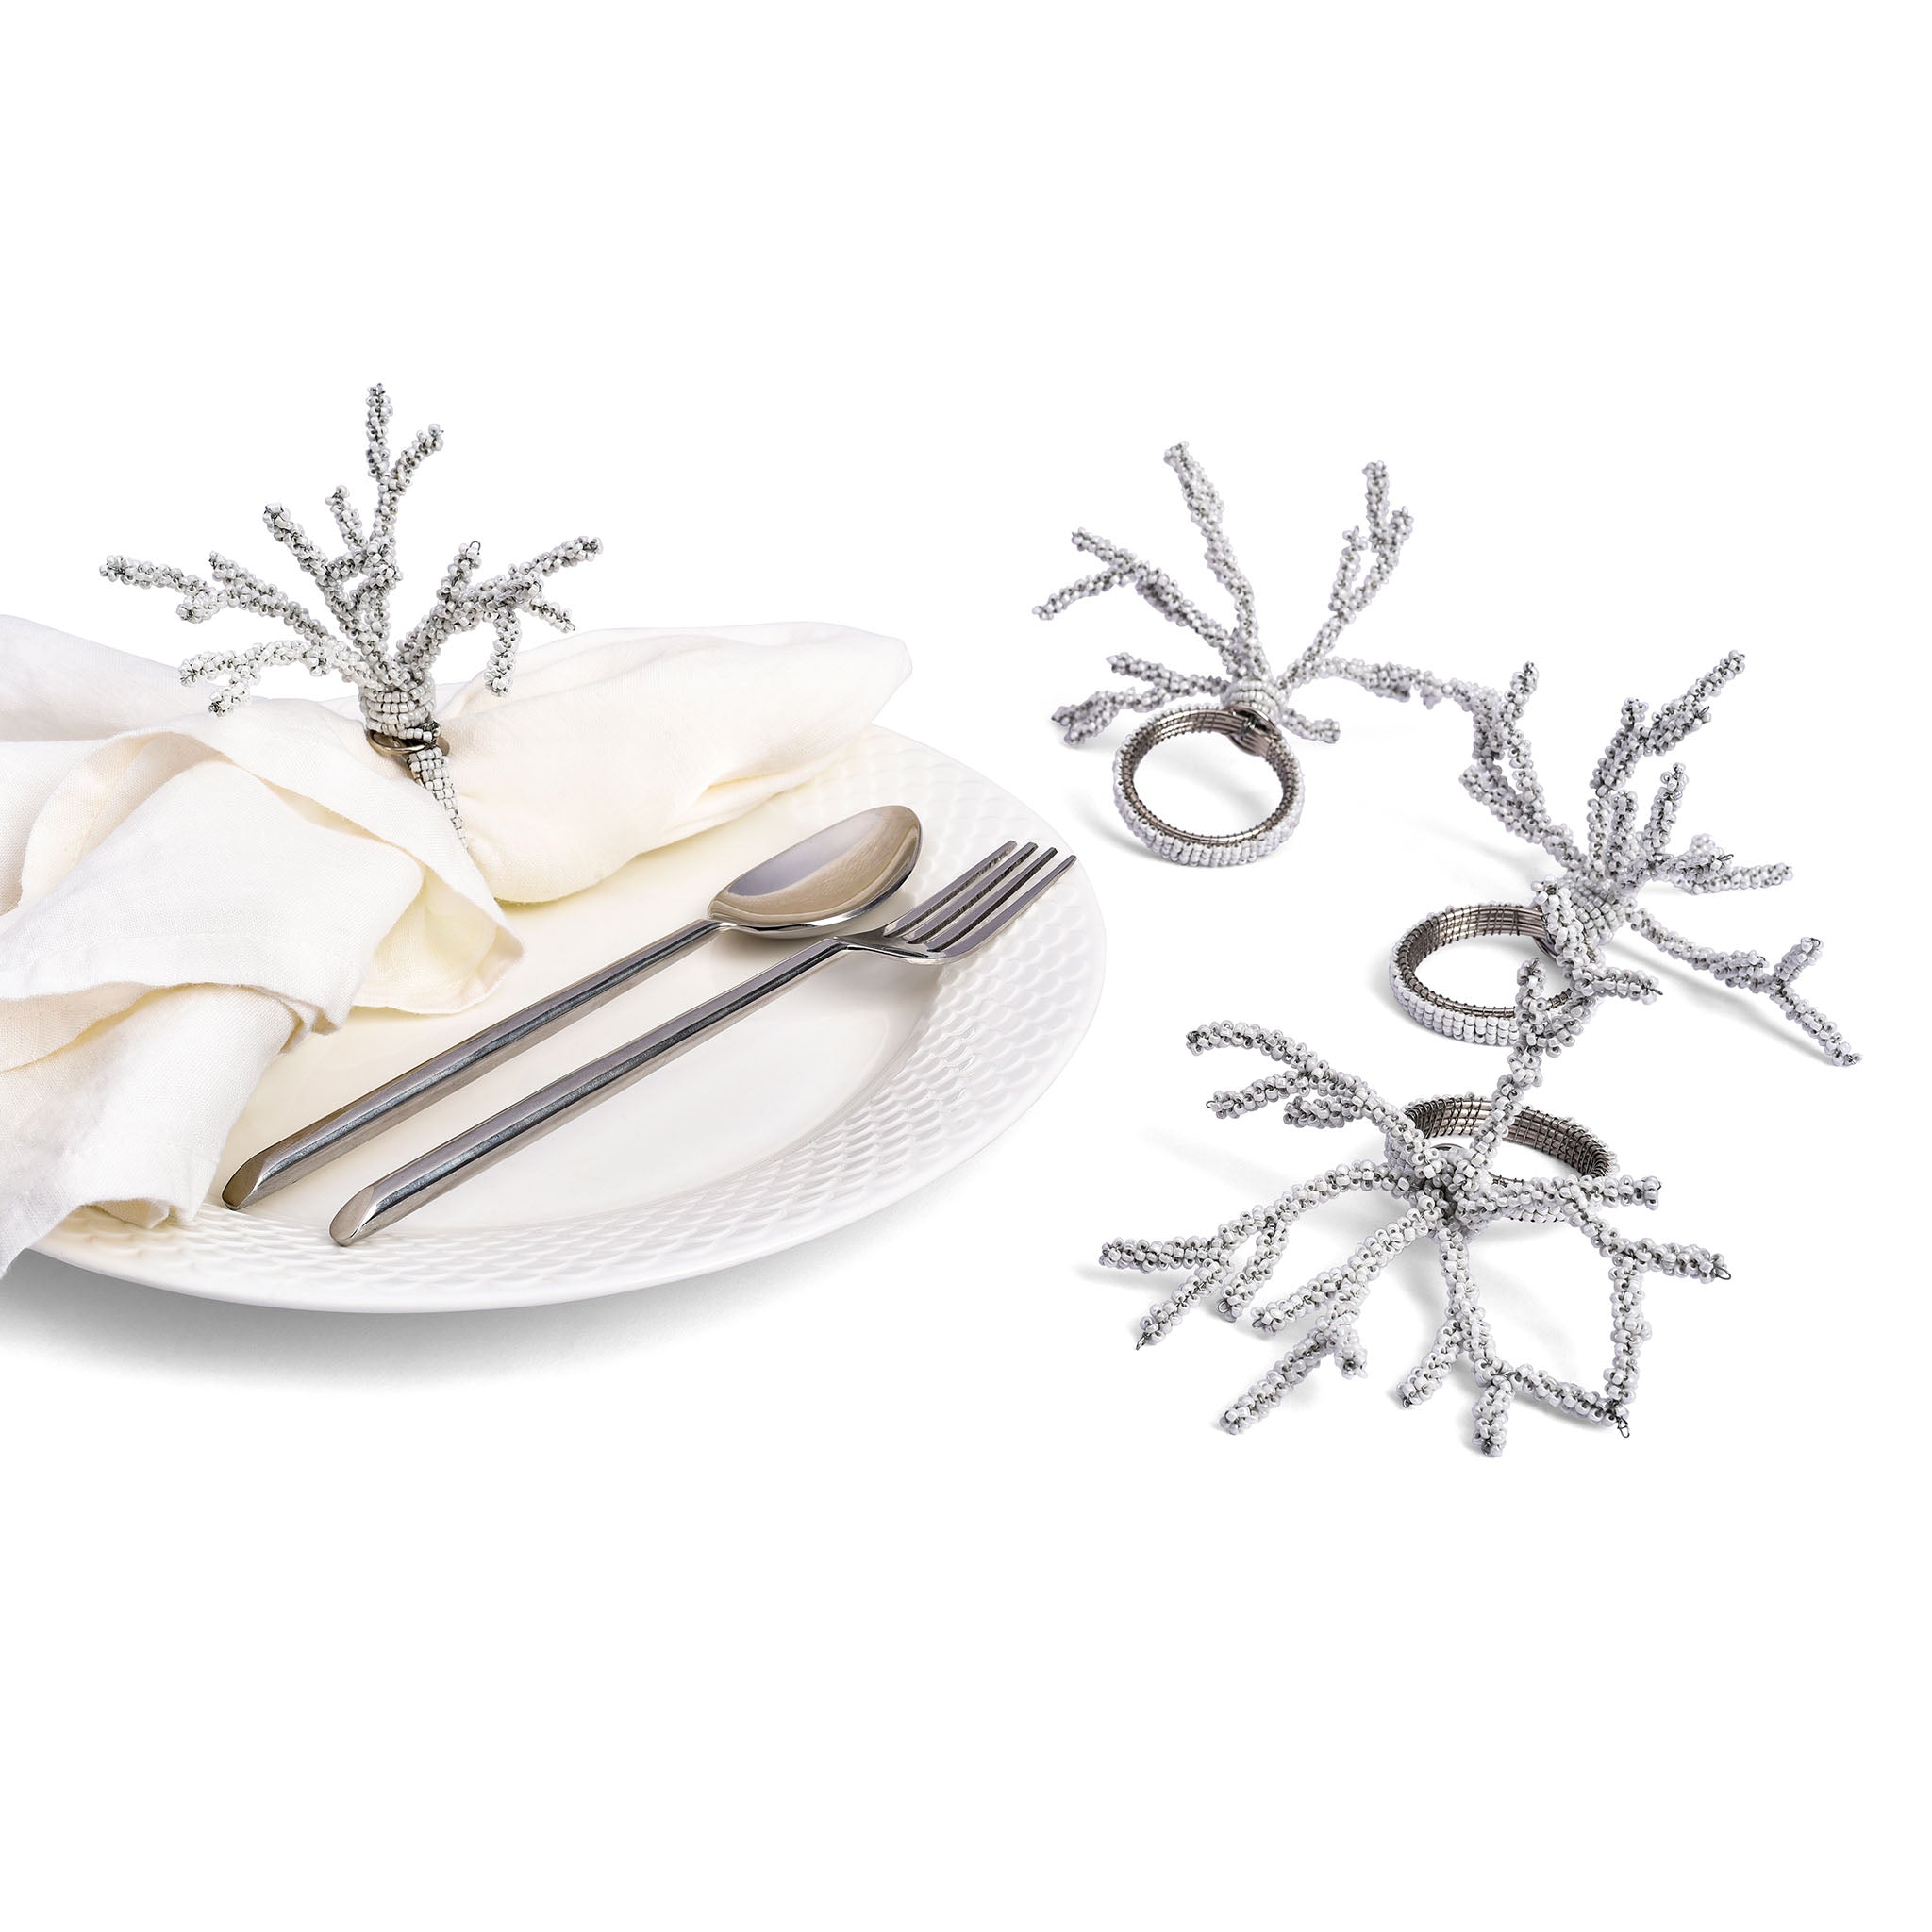 Reef Madness Napkin Ring in Luster White, Set of 4